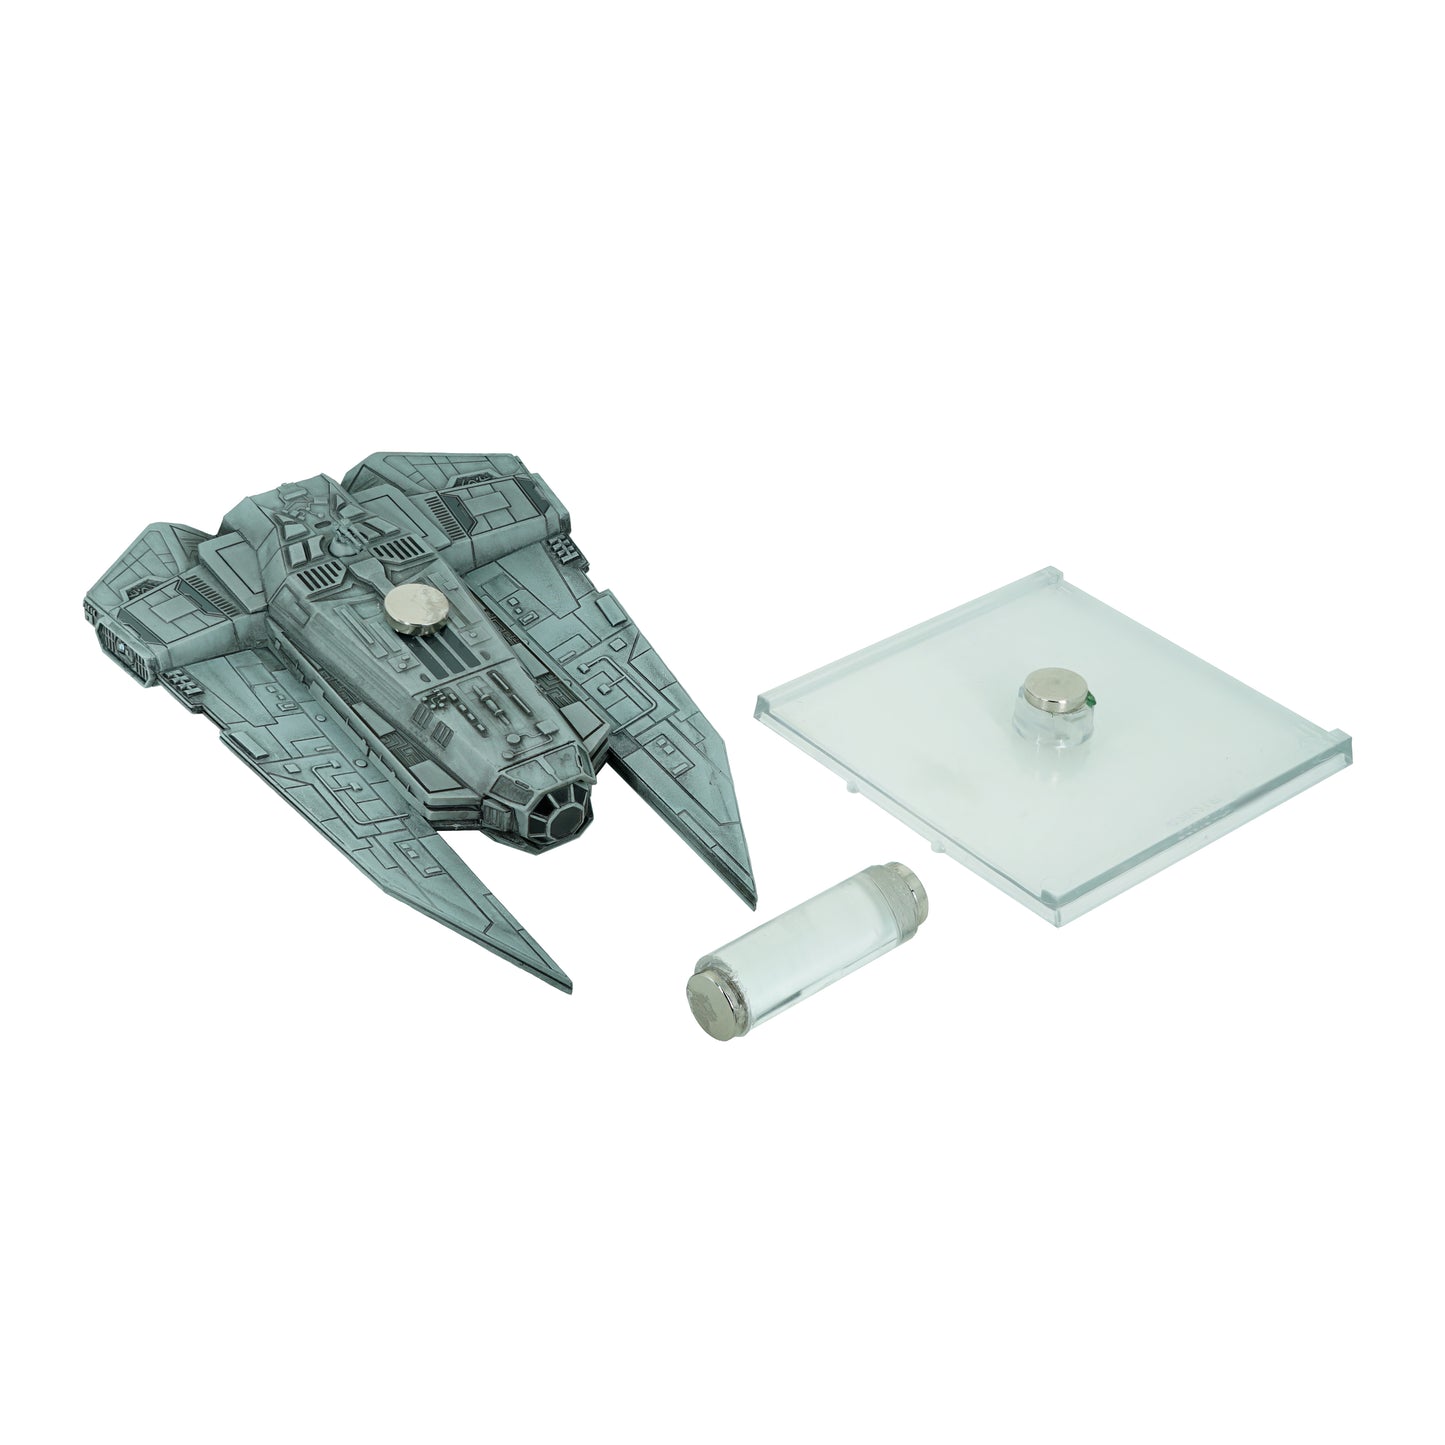 Ghost/Decimator Large Star Wars X-Wing Magnetic Flight Stands